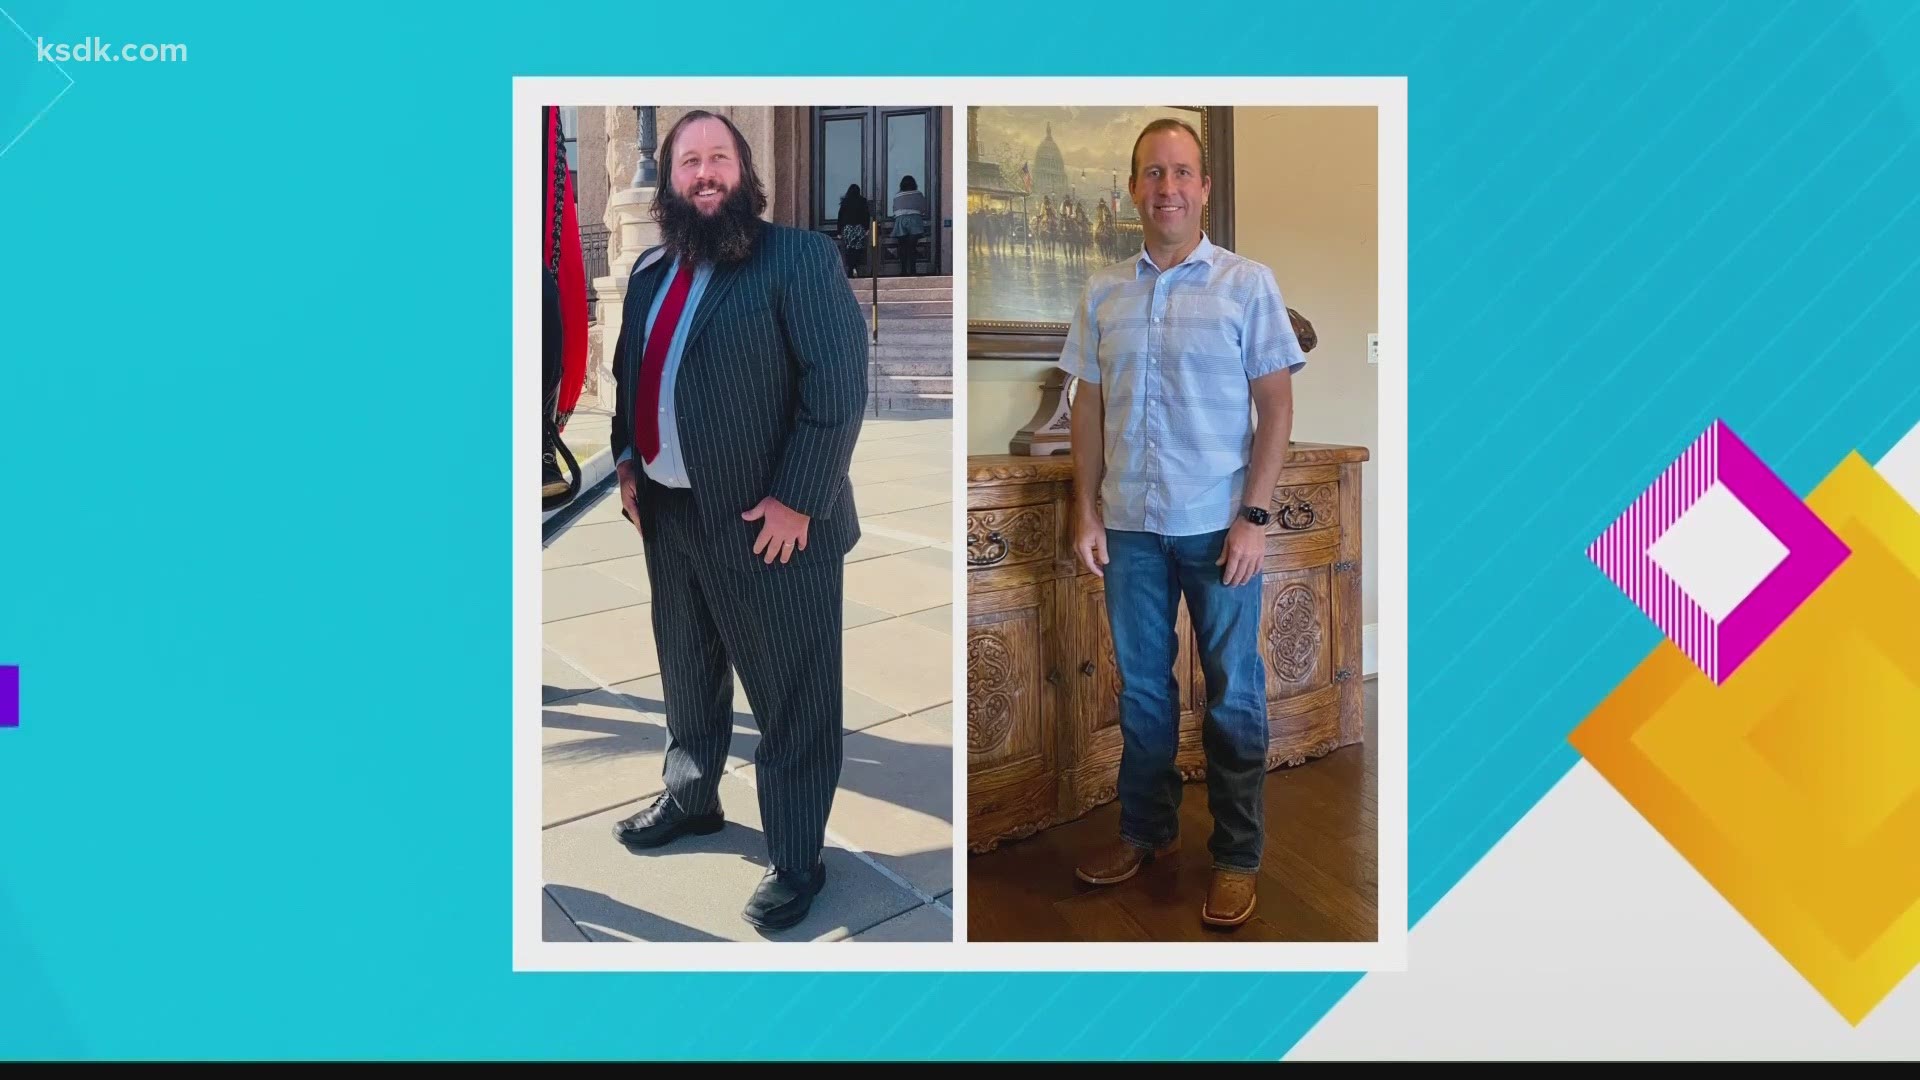 Dr. Gerad Troutman lost over 100 pounds, during a pandemic, while working as a first responder, and meeting with Charles though virtual meetings. WOW!